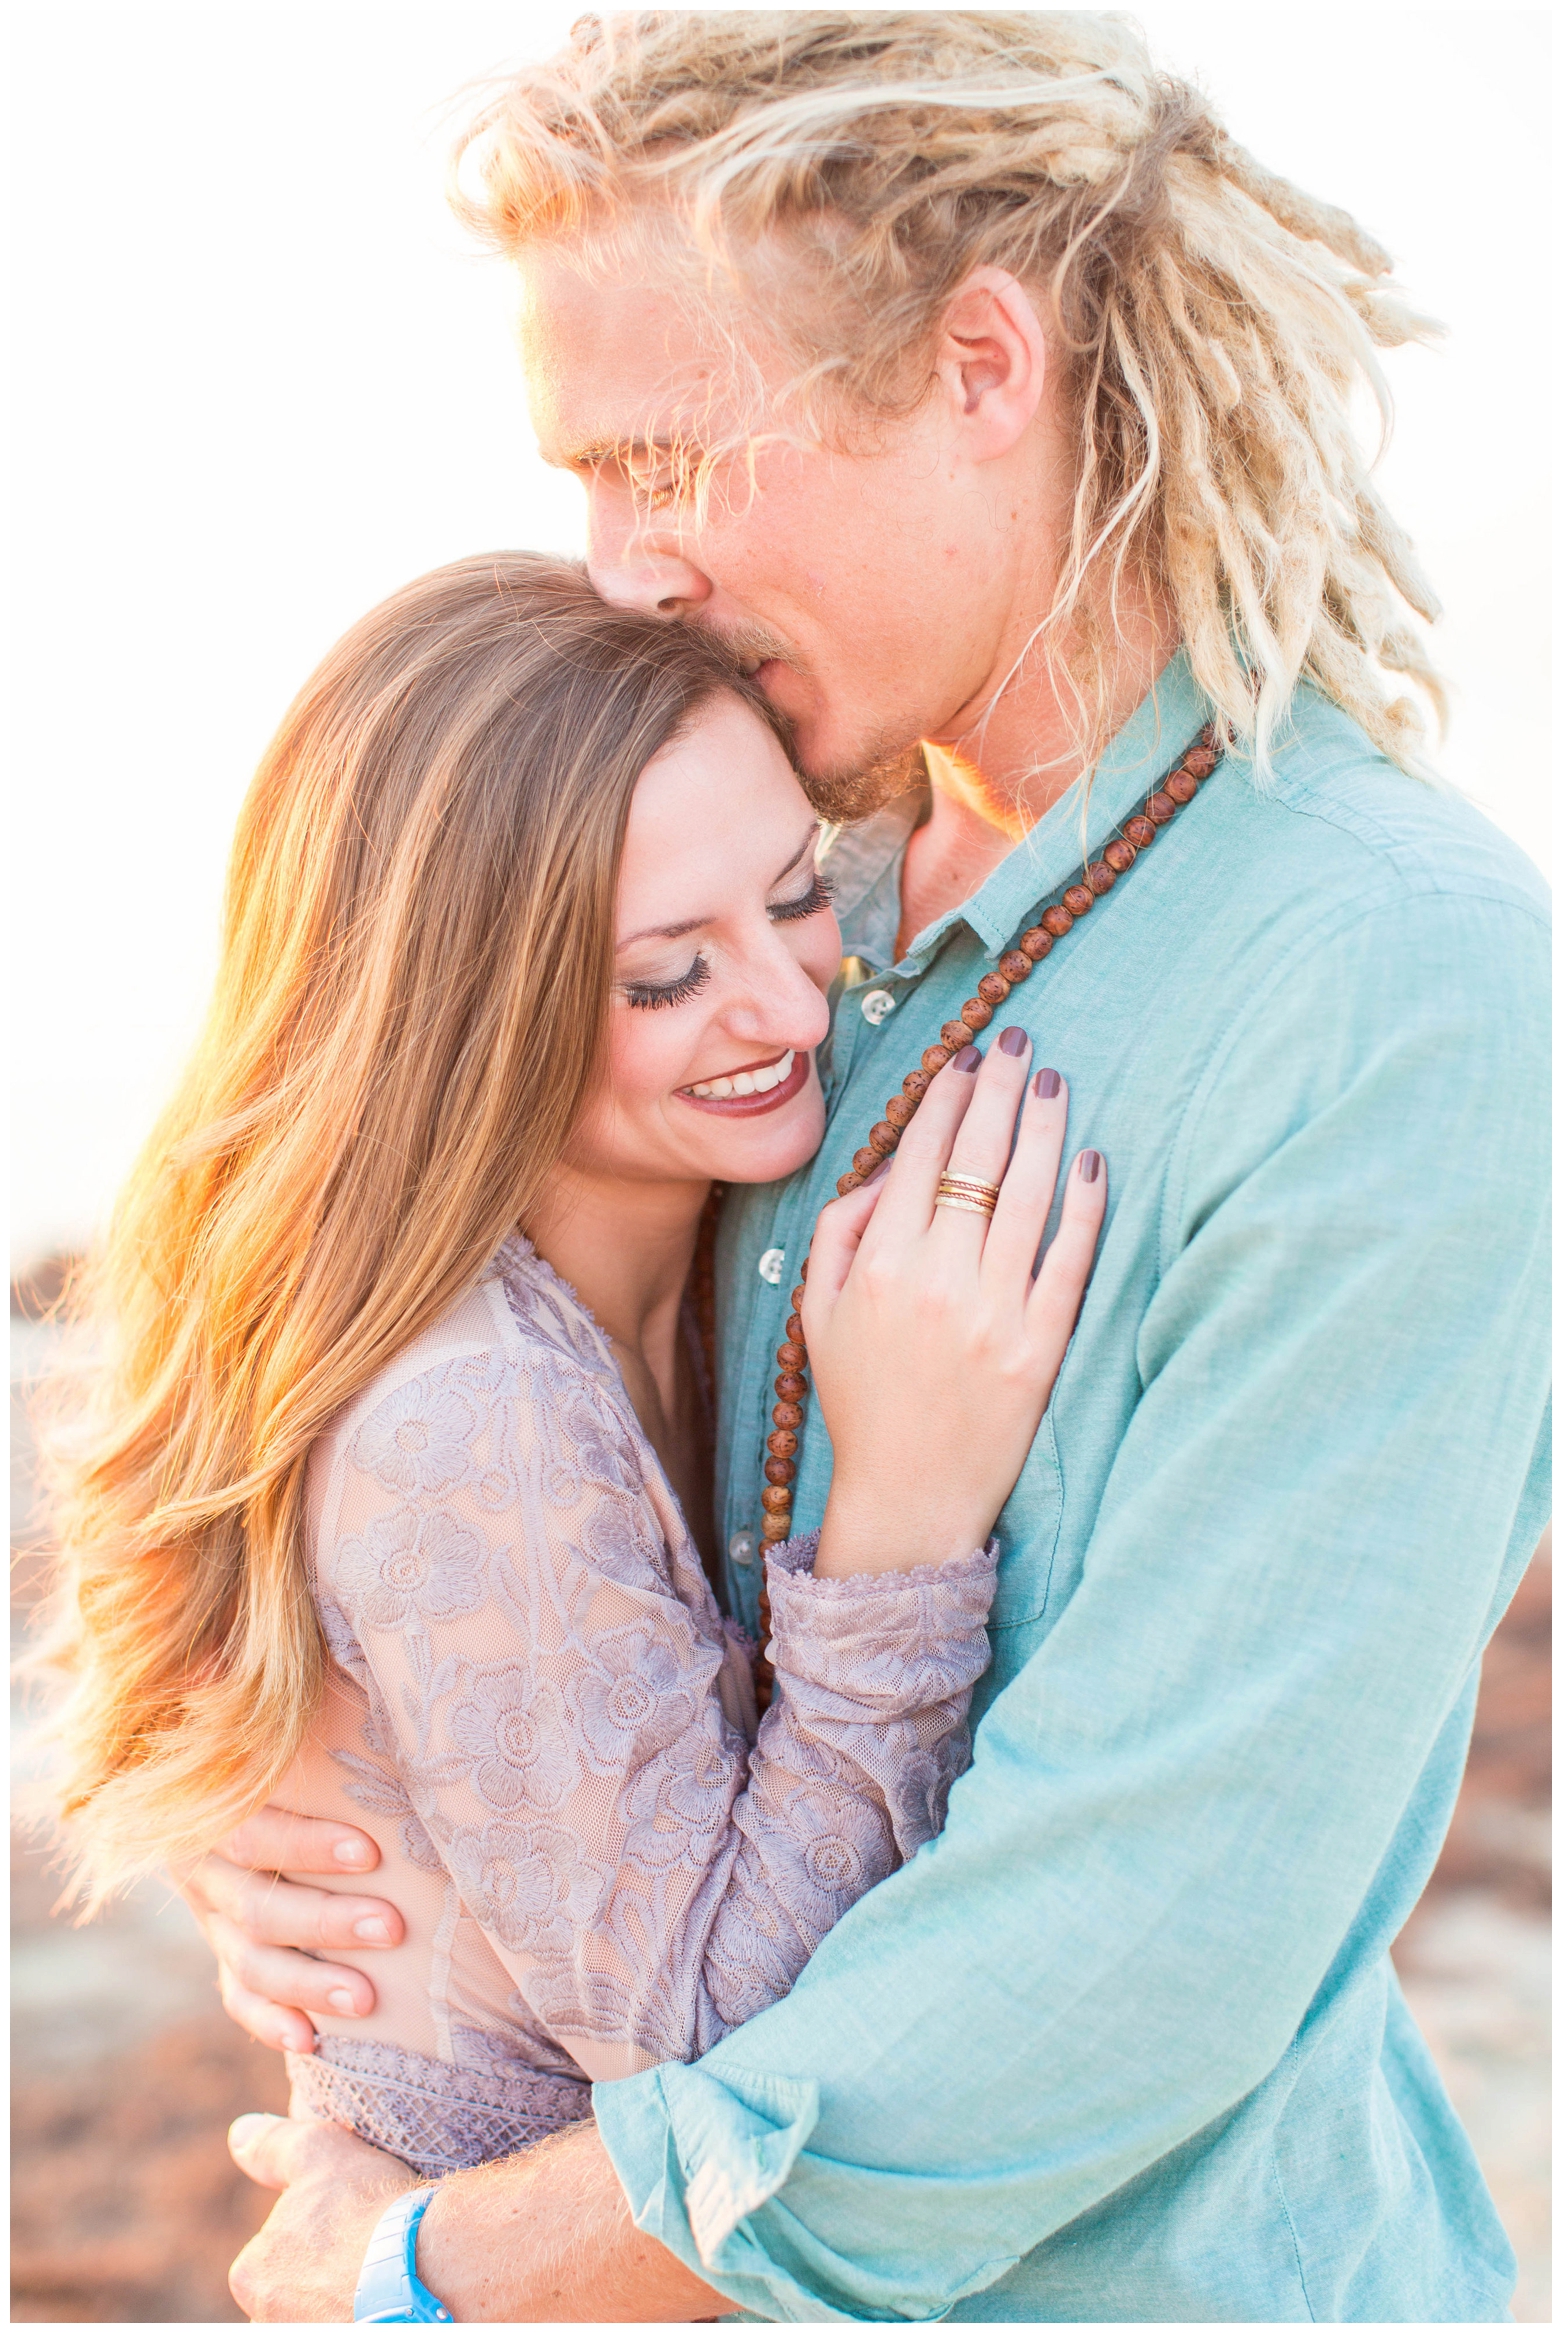 View More: http://hopetaylorphotographyphotos.pass.us/remy-and-eli-engagement